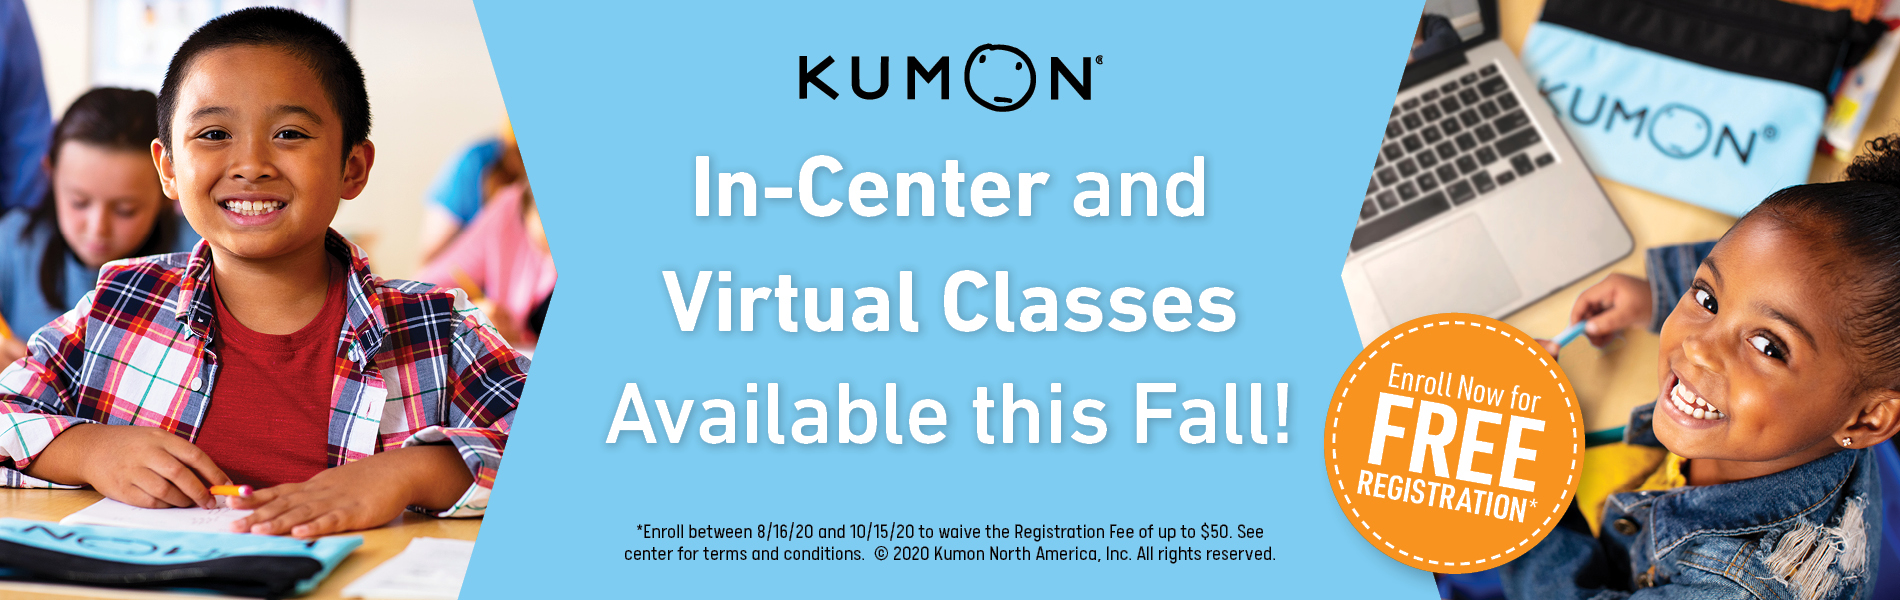 kumon-aims-to-help-kids-go-back-to-school-with-confidence